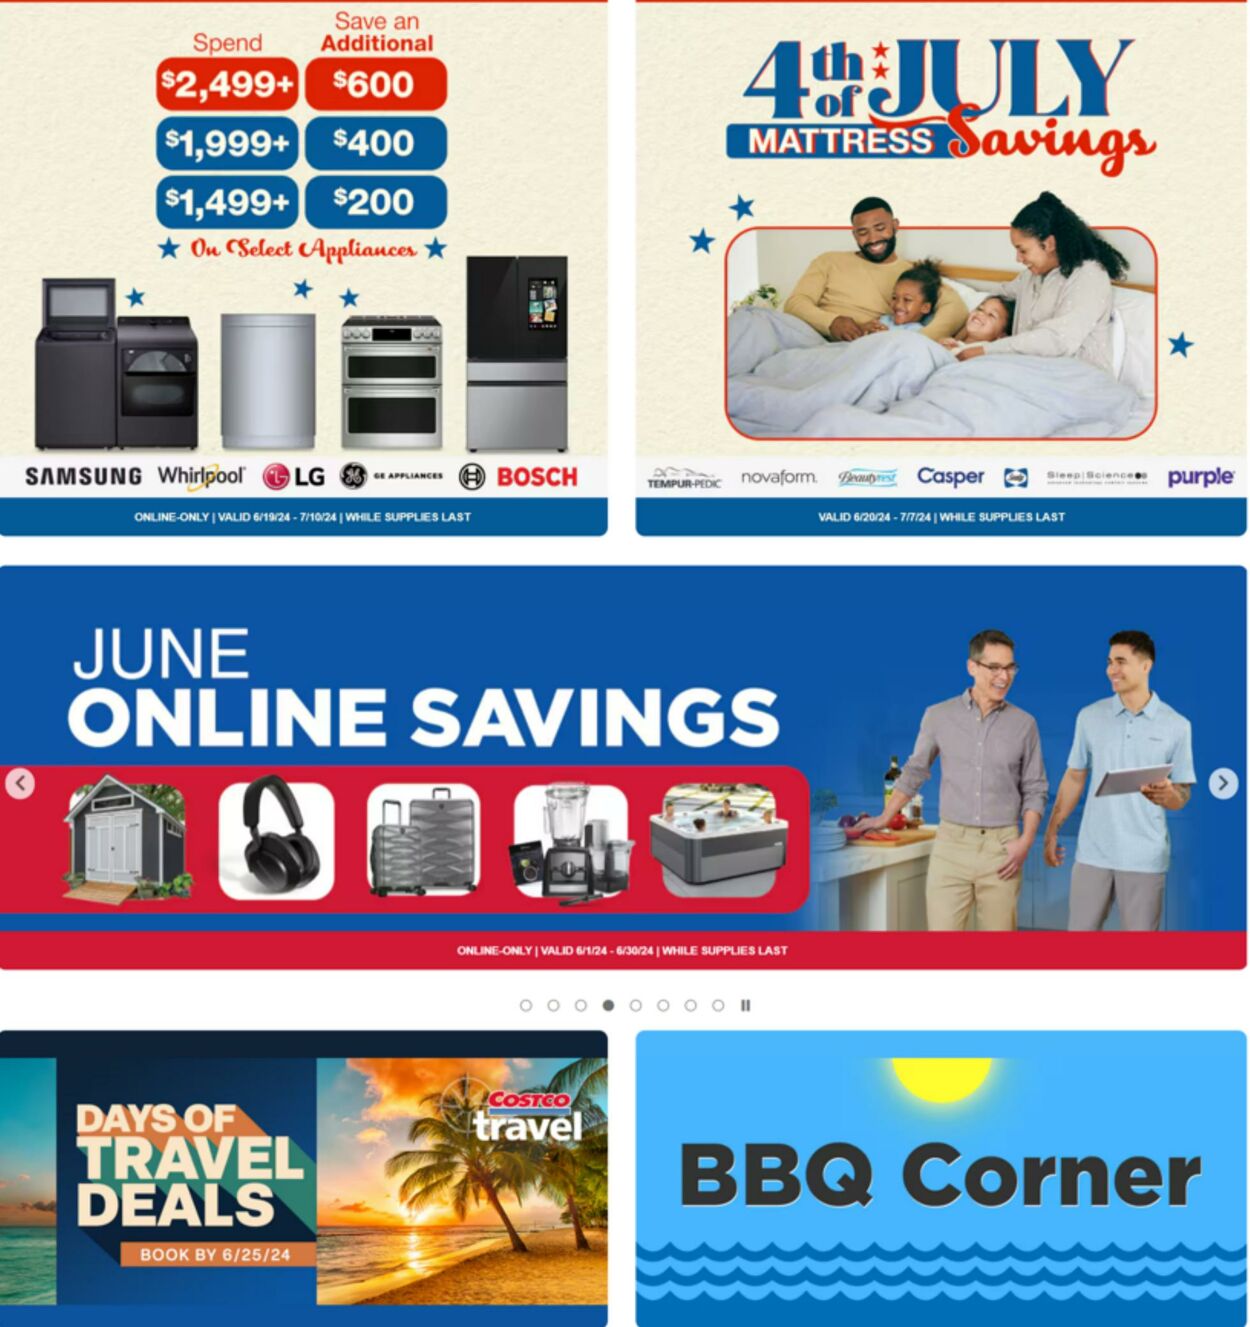 Costco Promotional weekly ads